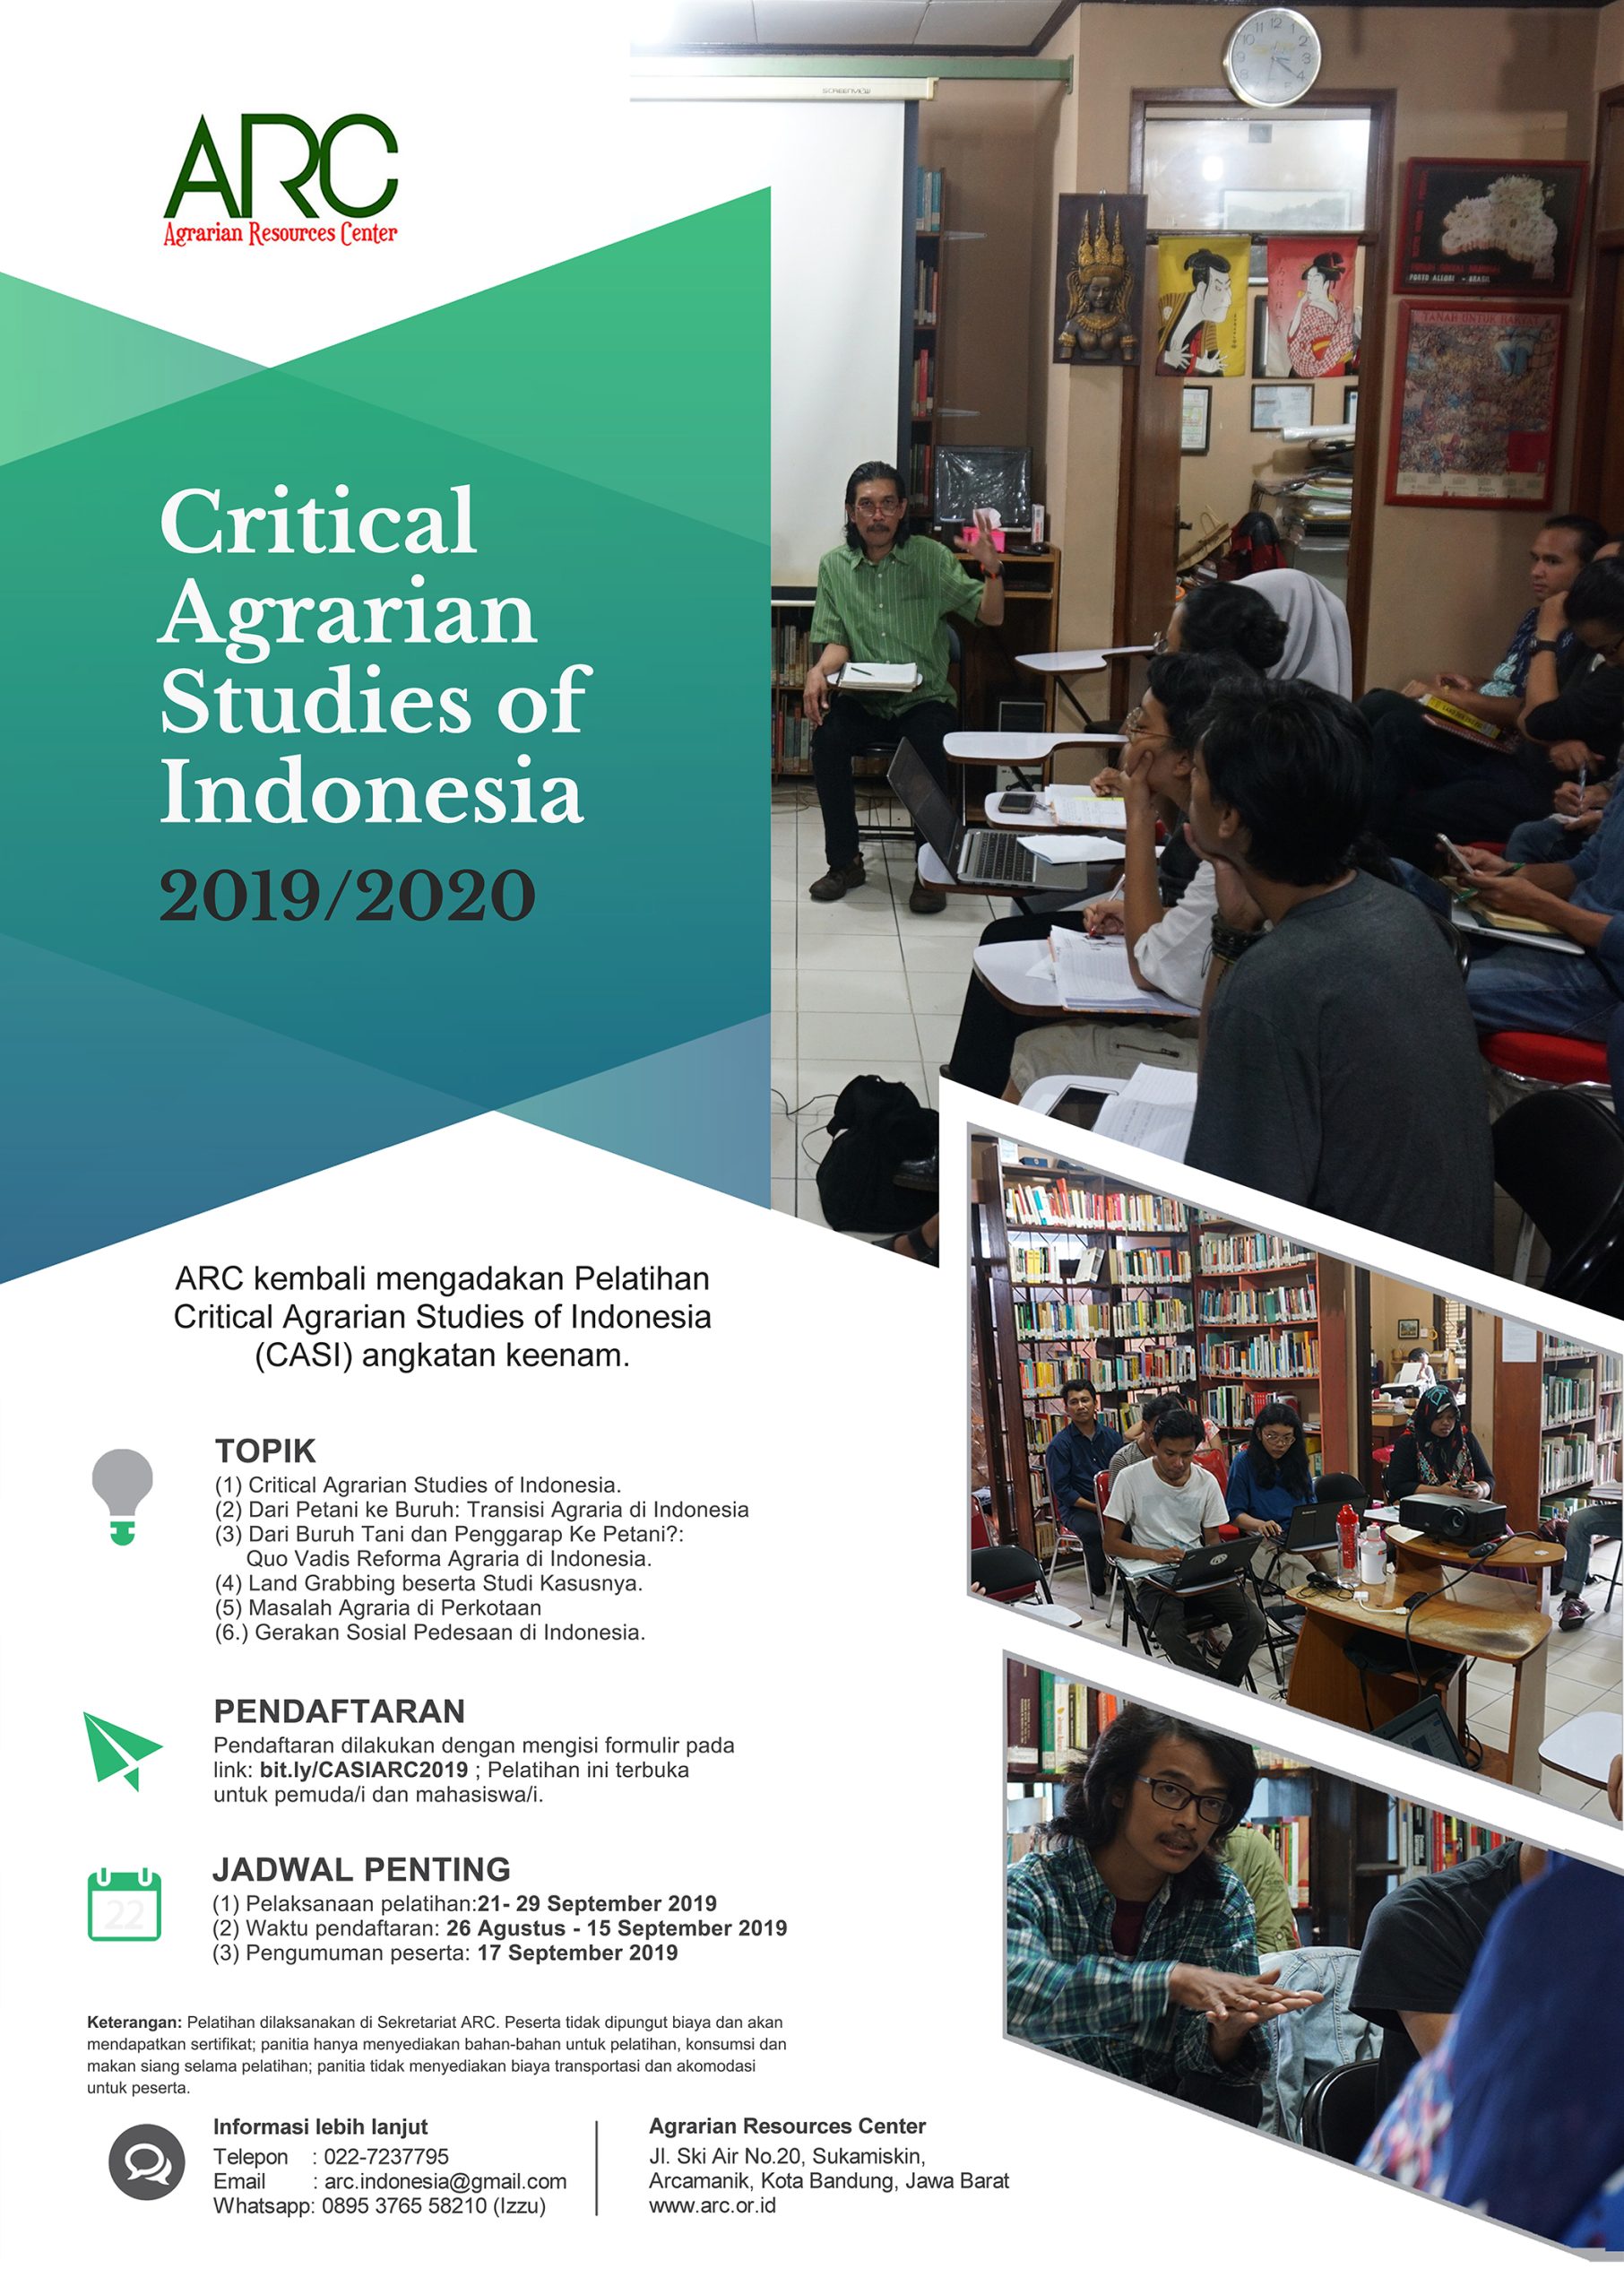 Critical Agrarian Studies of Indonesia, Agrarian Resources Center